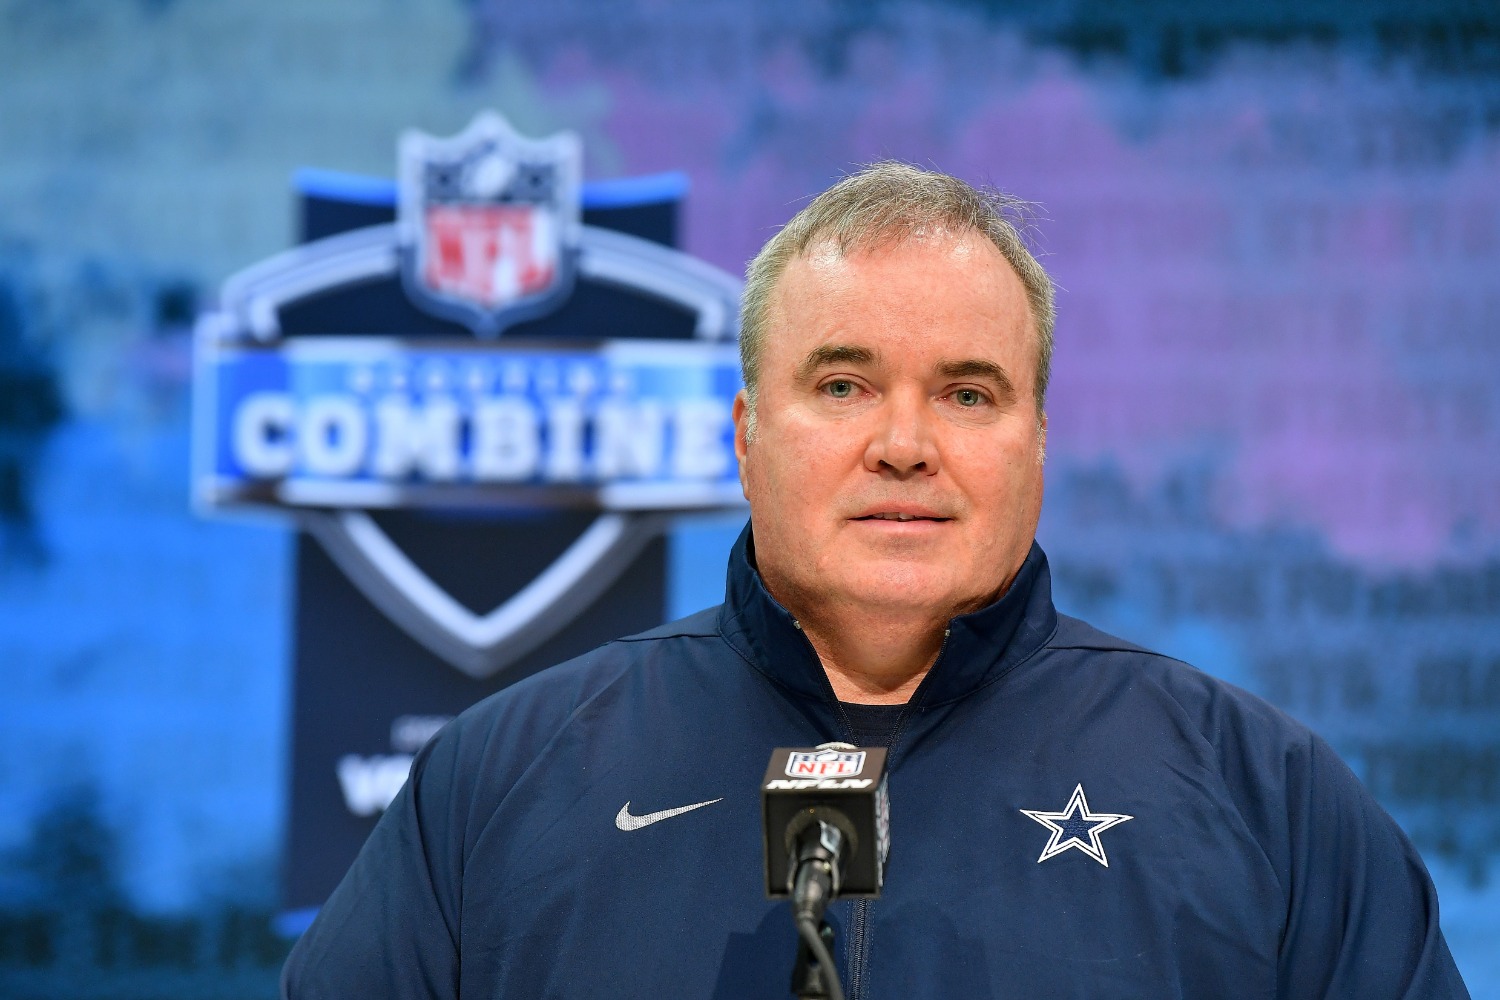 Mike McCarthy just revealed a major change that the Cowboys will implement this season.